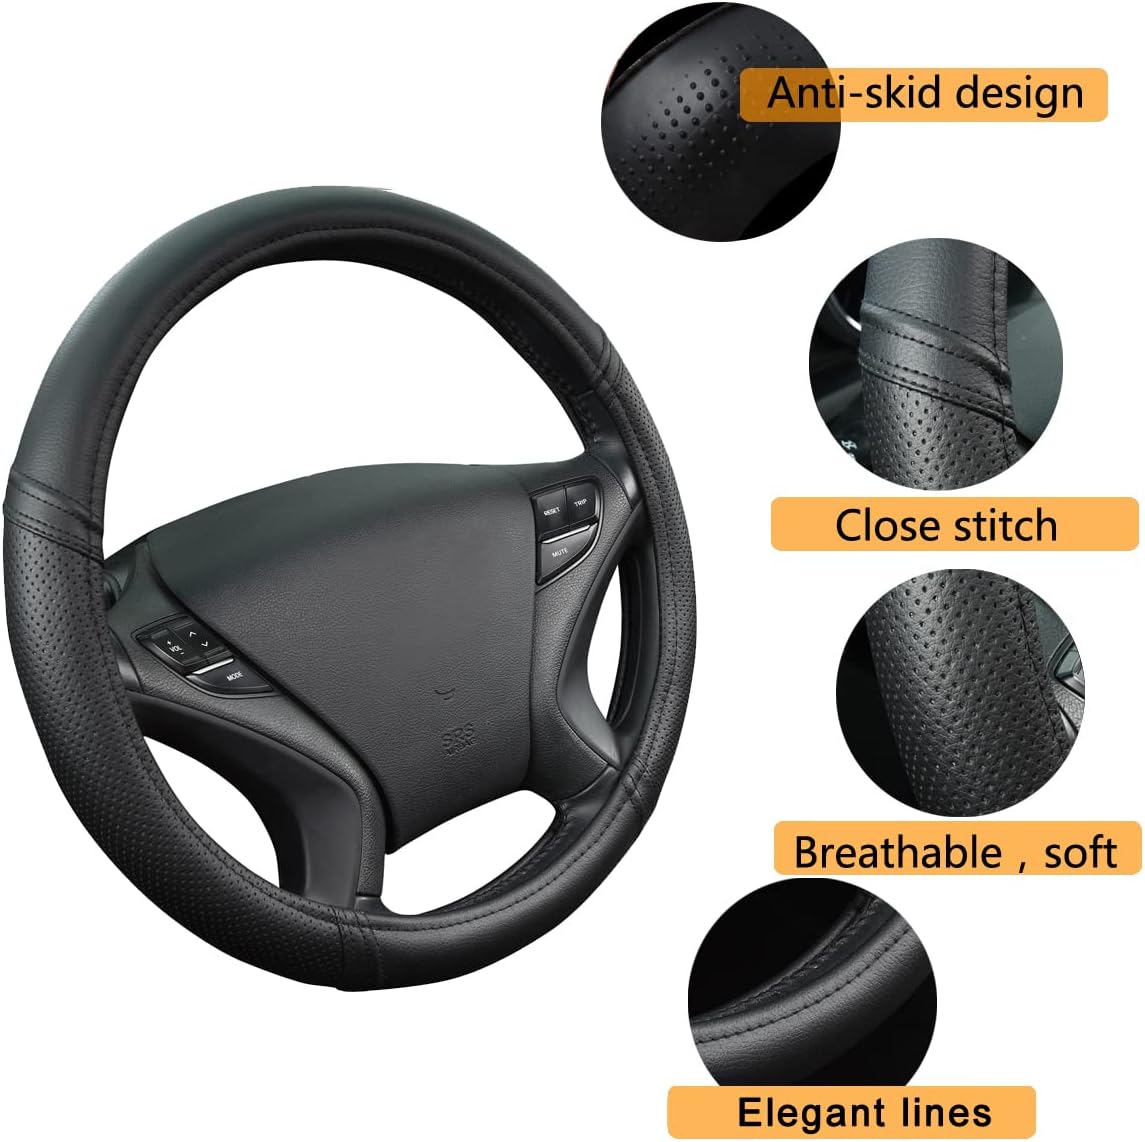 CAR PASS Leather Two Front Car Seat Cover; 4Pcs Waterproof Car Floor Mats & Steering Wheel Cover,Universal Fit Airbag Compatible Automotive Interior Covers (Combo Set, Black)